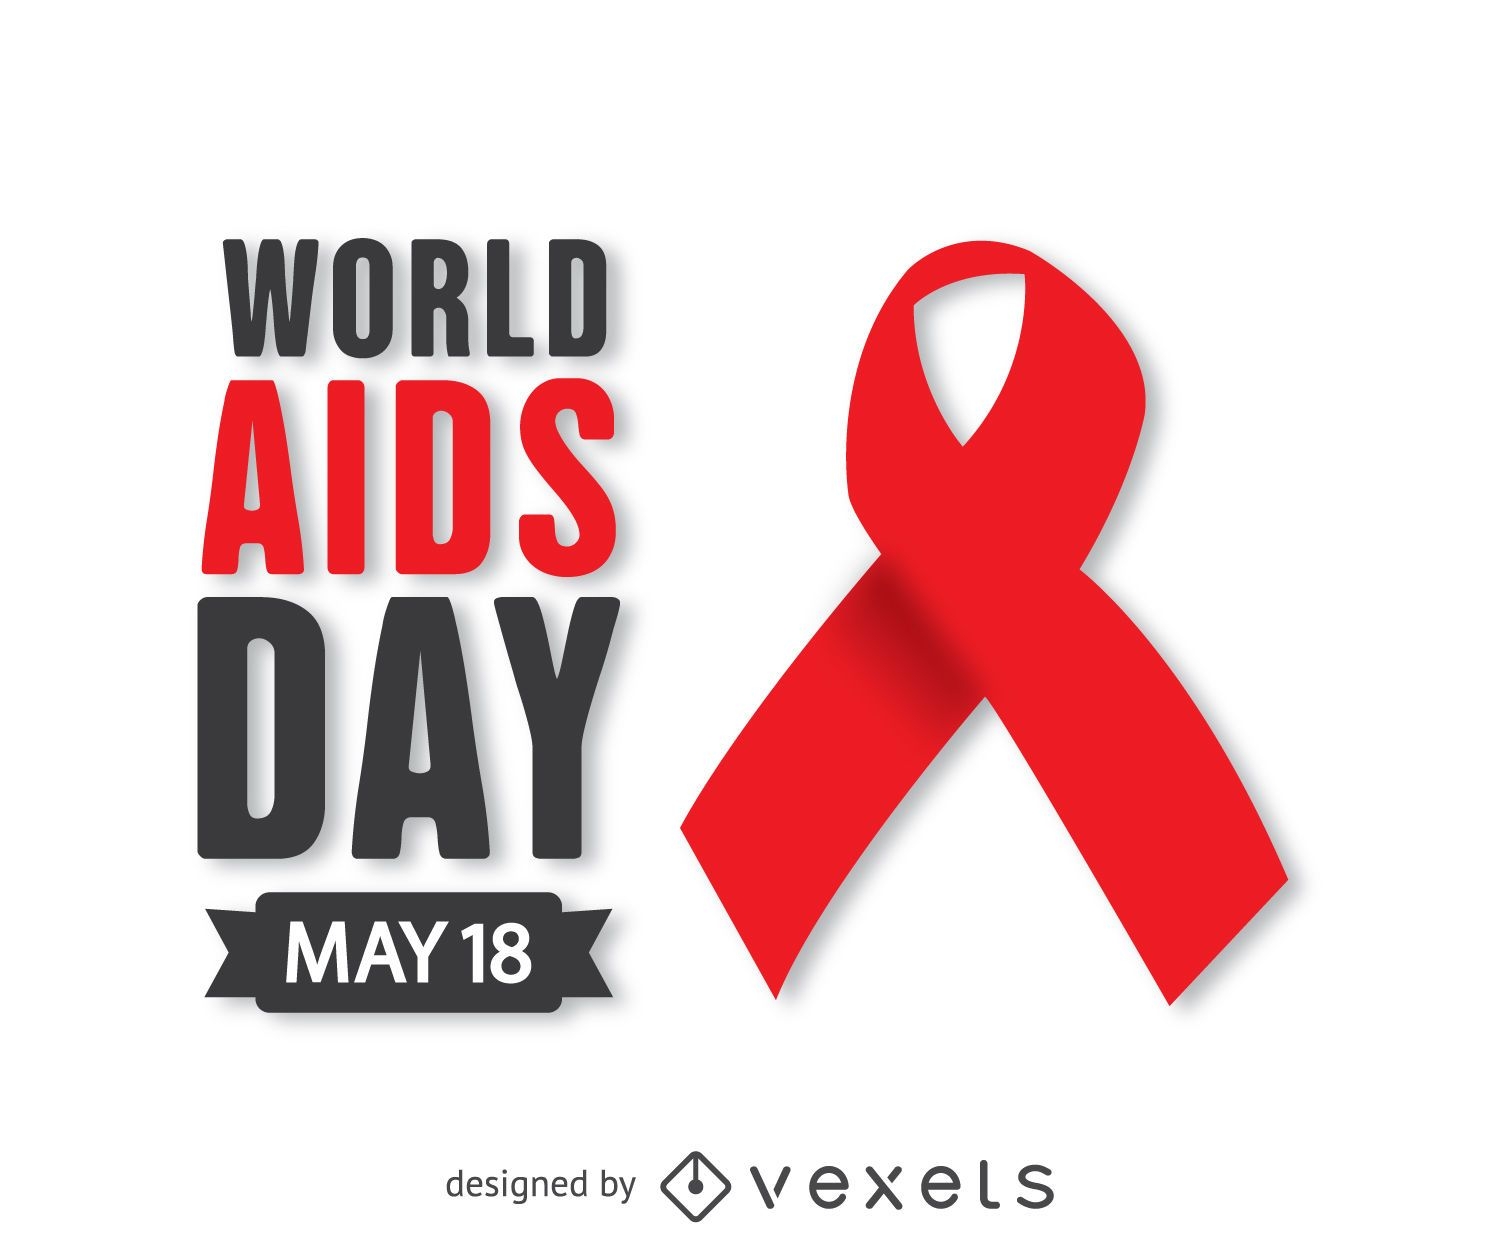 aids red ribbon vector